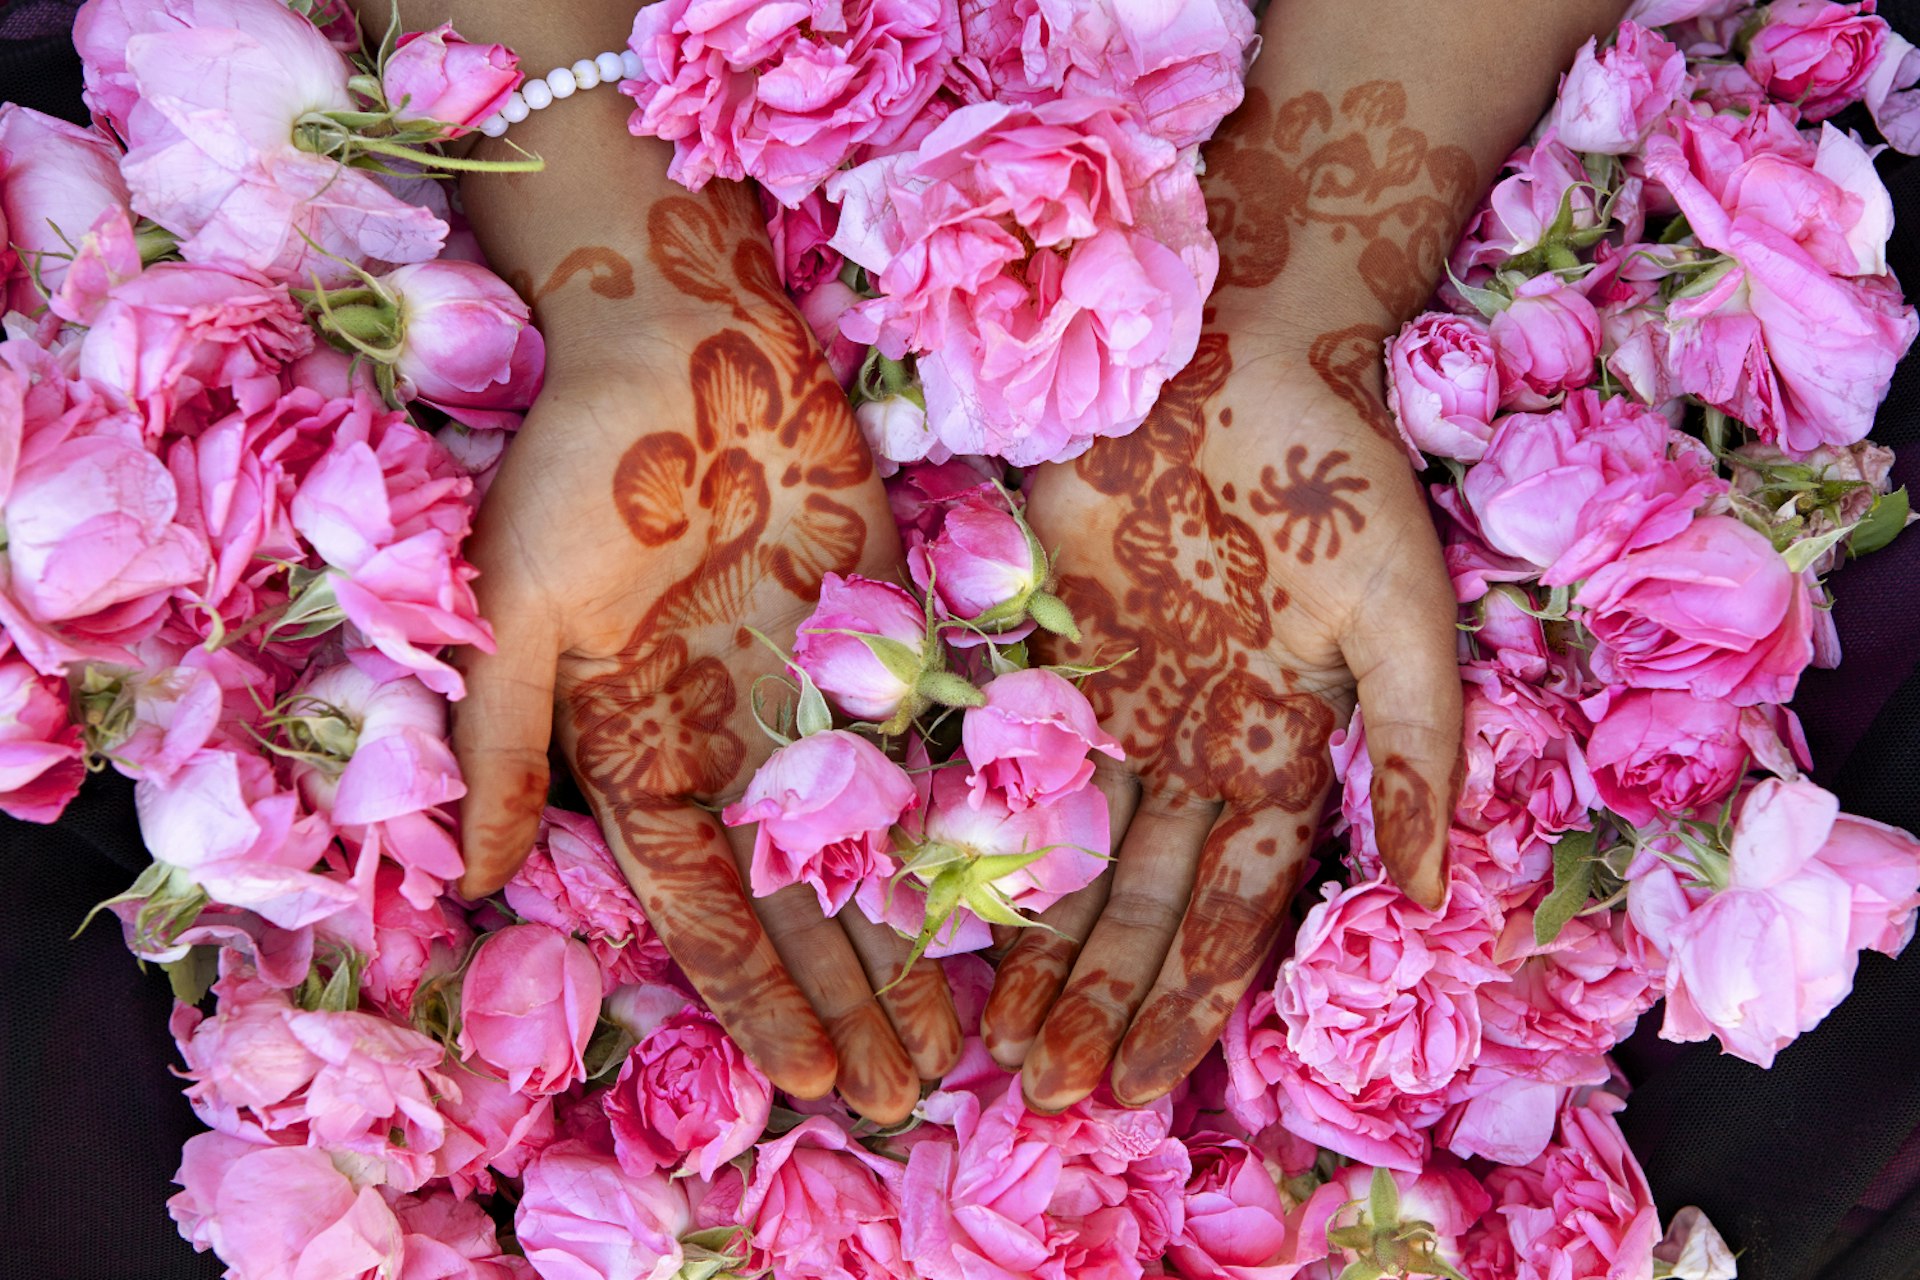 Hands painted with henna rest on top of a bed of rose petals